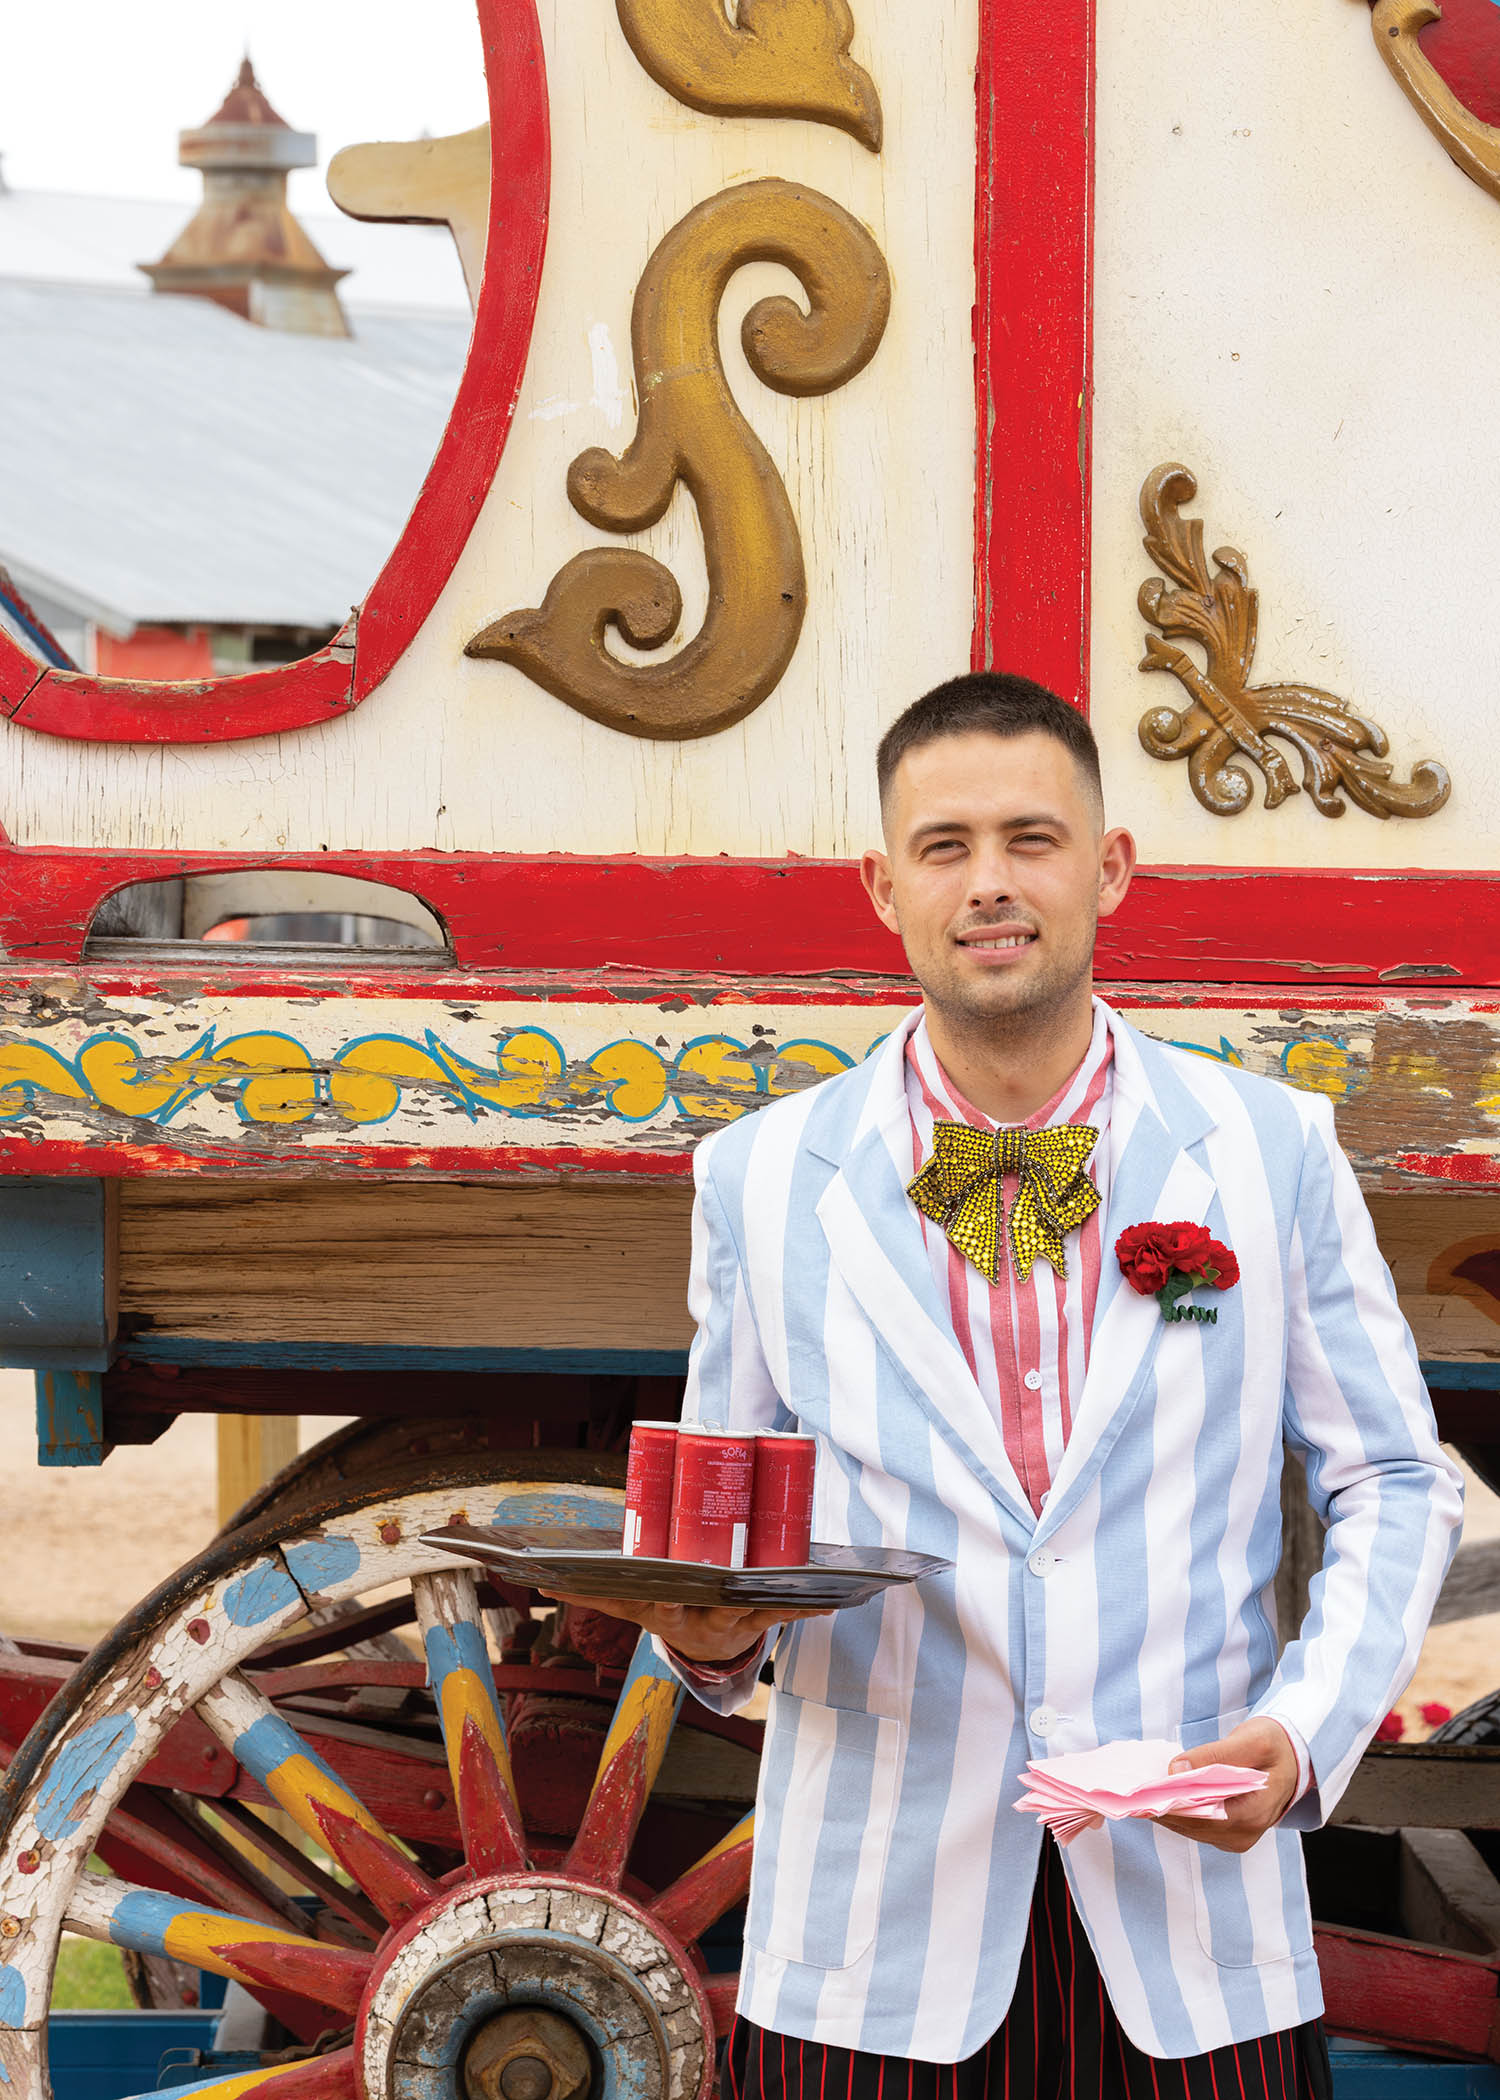 Man stands in front of a colorful carriage in a pale blue striped blazer.